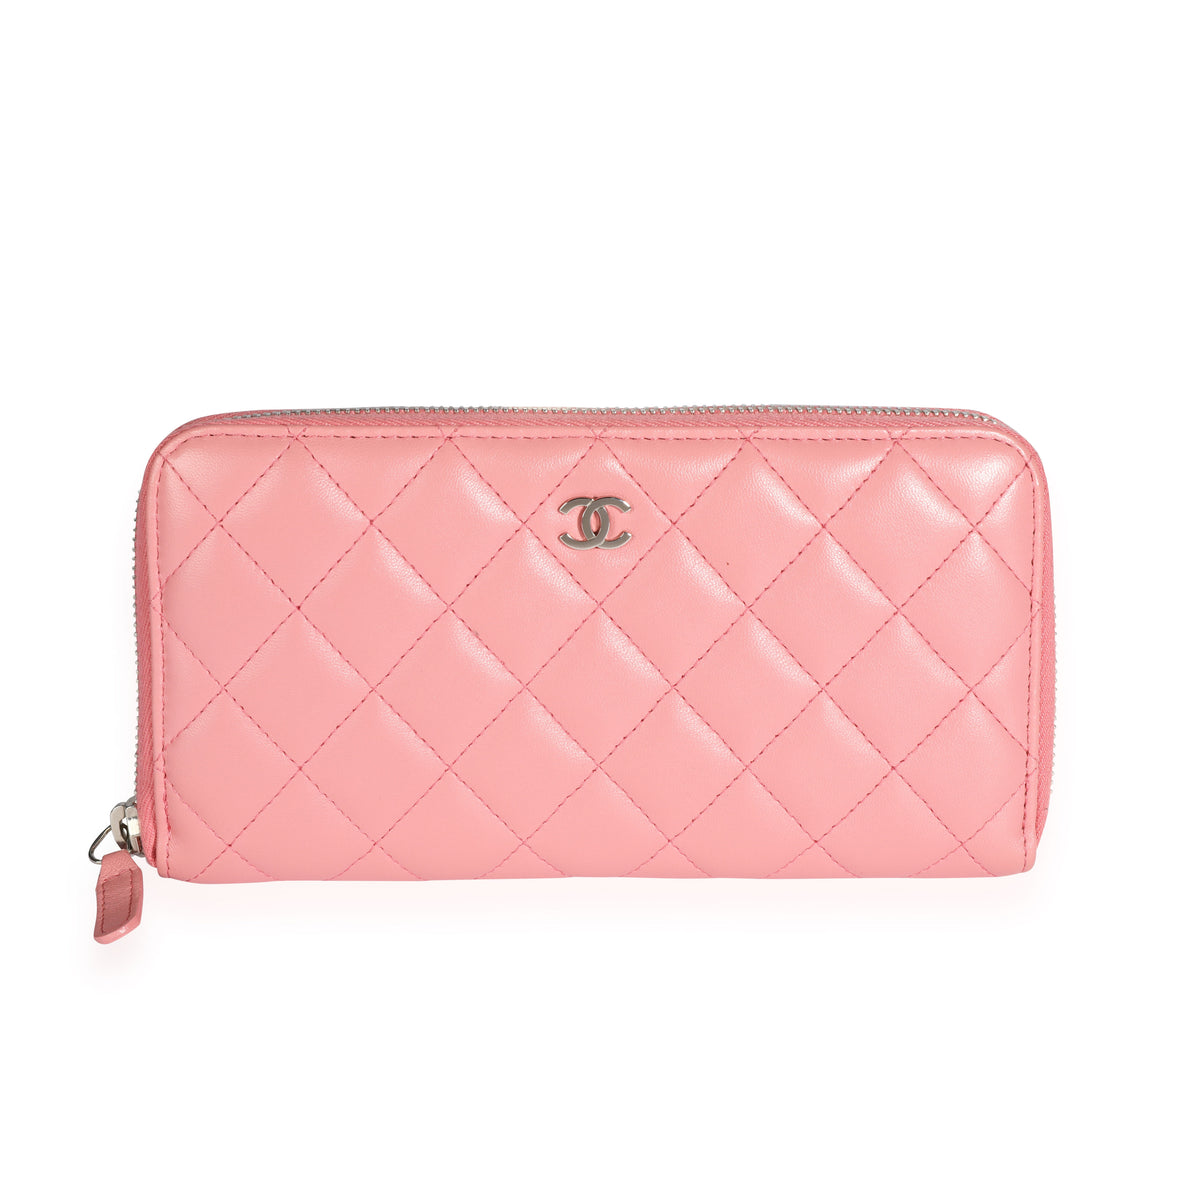 Chanel Pink Quilted Caviar Leather L-Gusset Zip Wallet